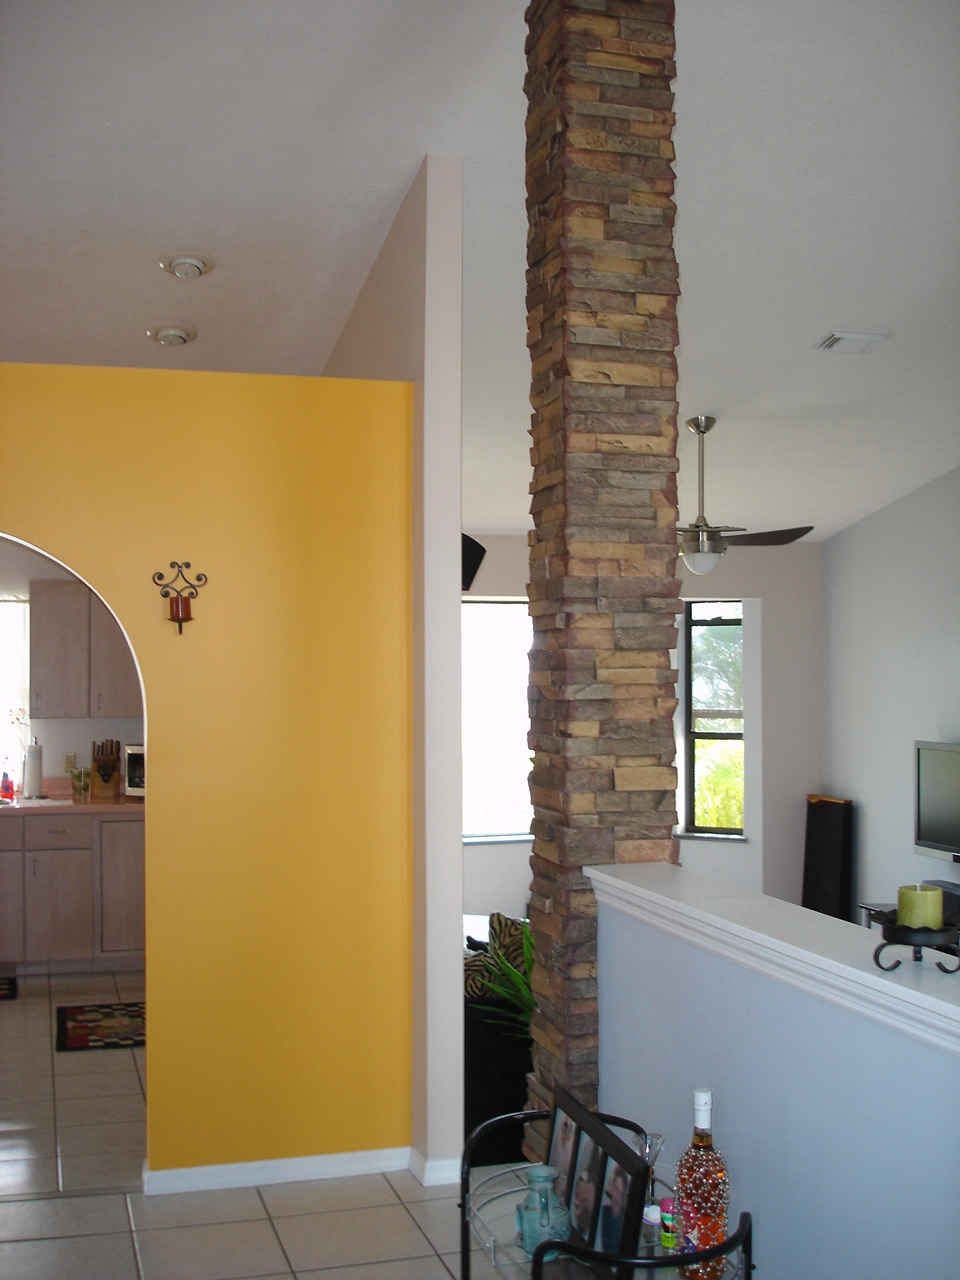 Decorative interior column covering an existing support in a home's living area